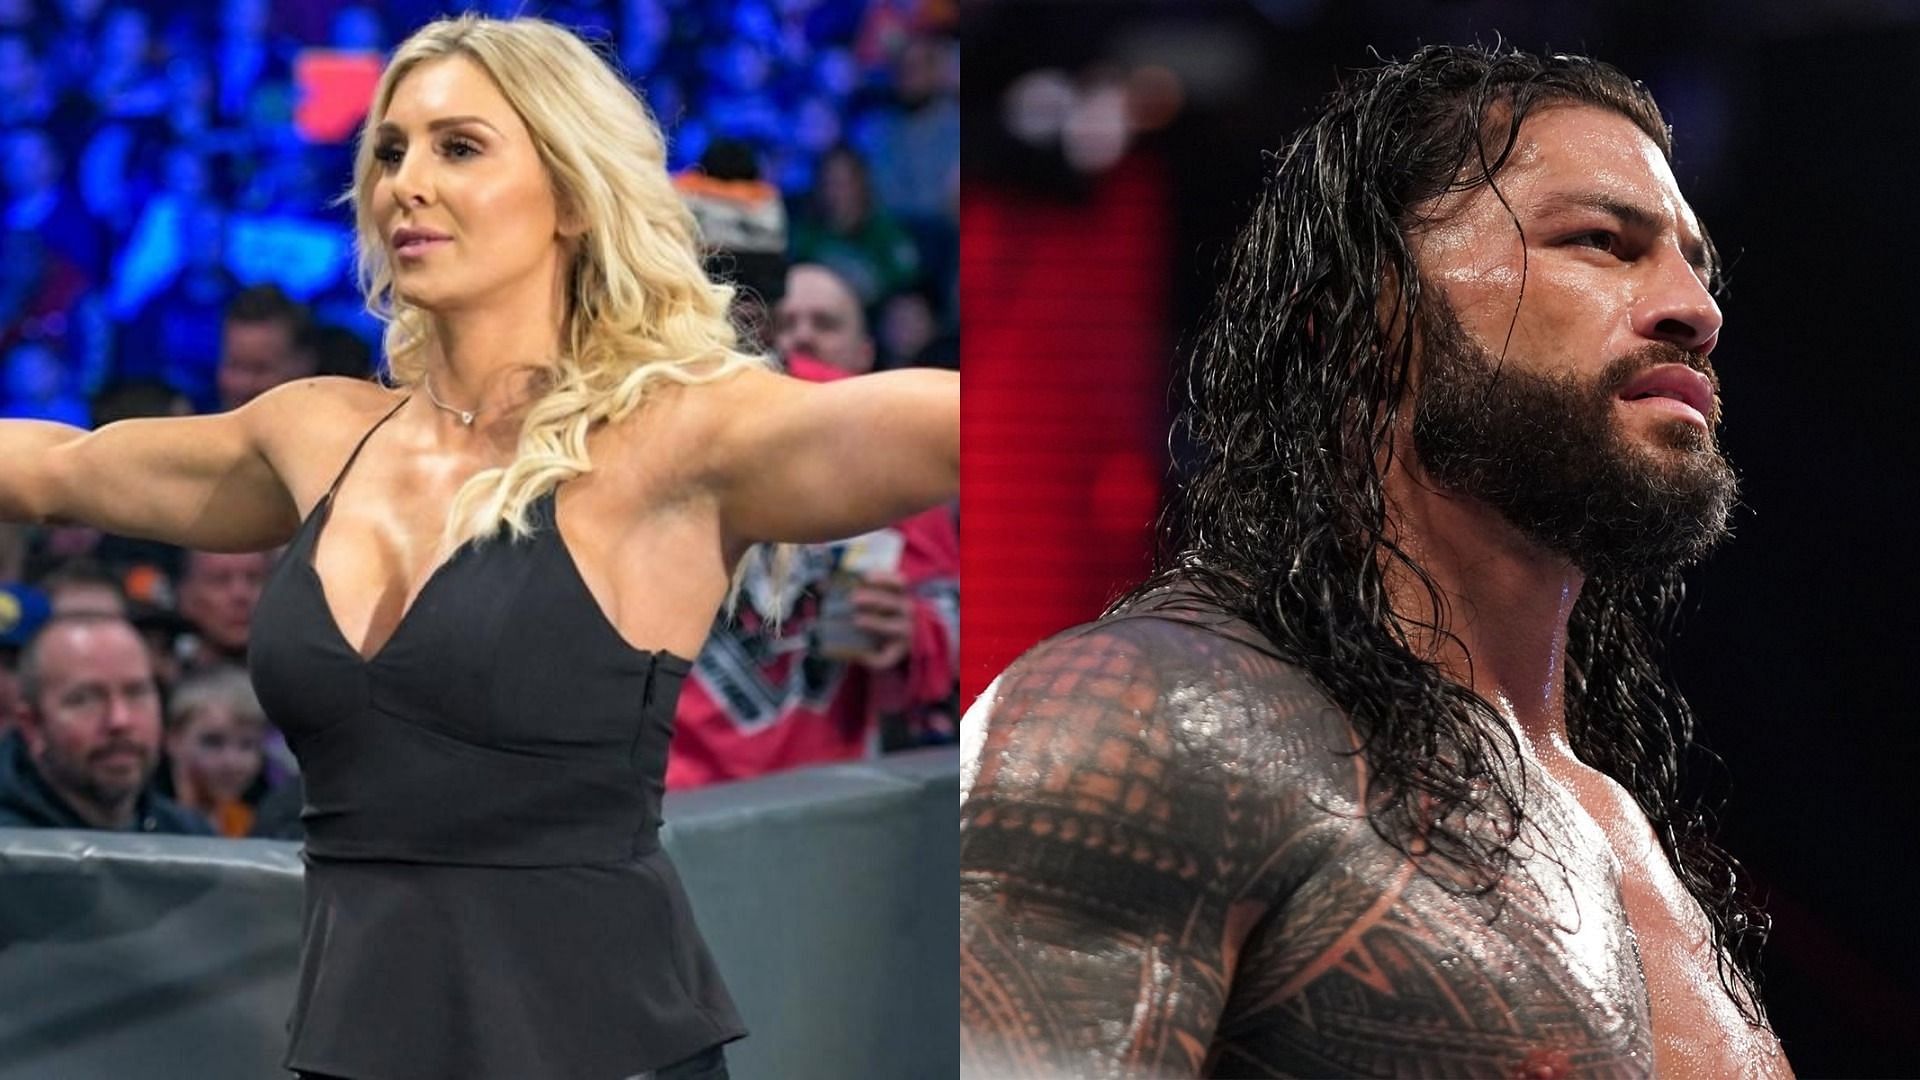 Charlotte Flair (left); Roman Reigns (right)